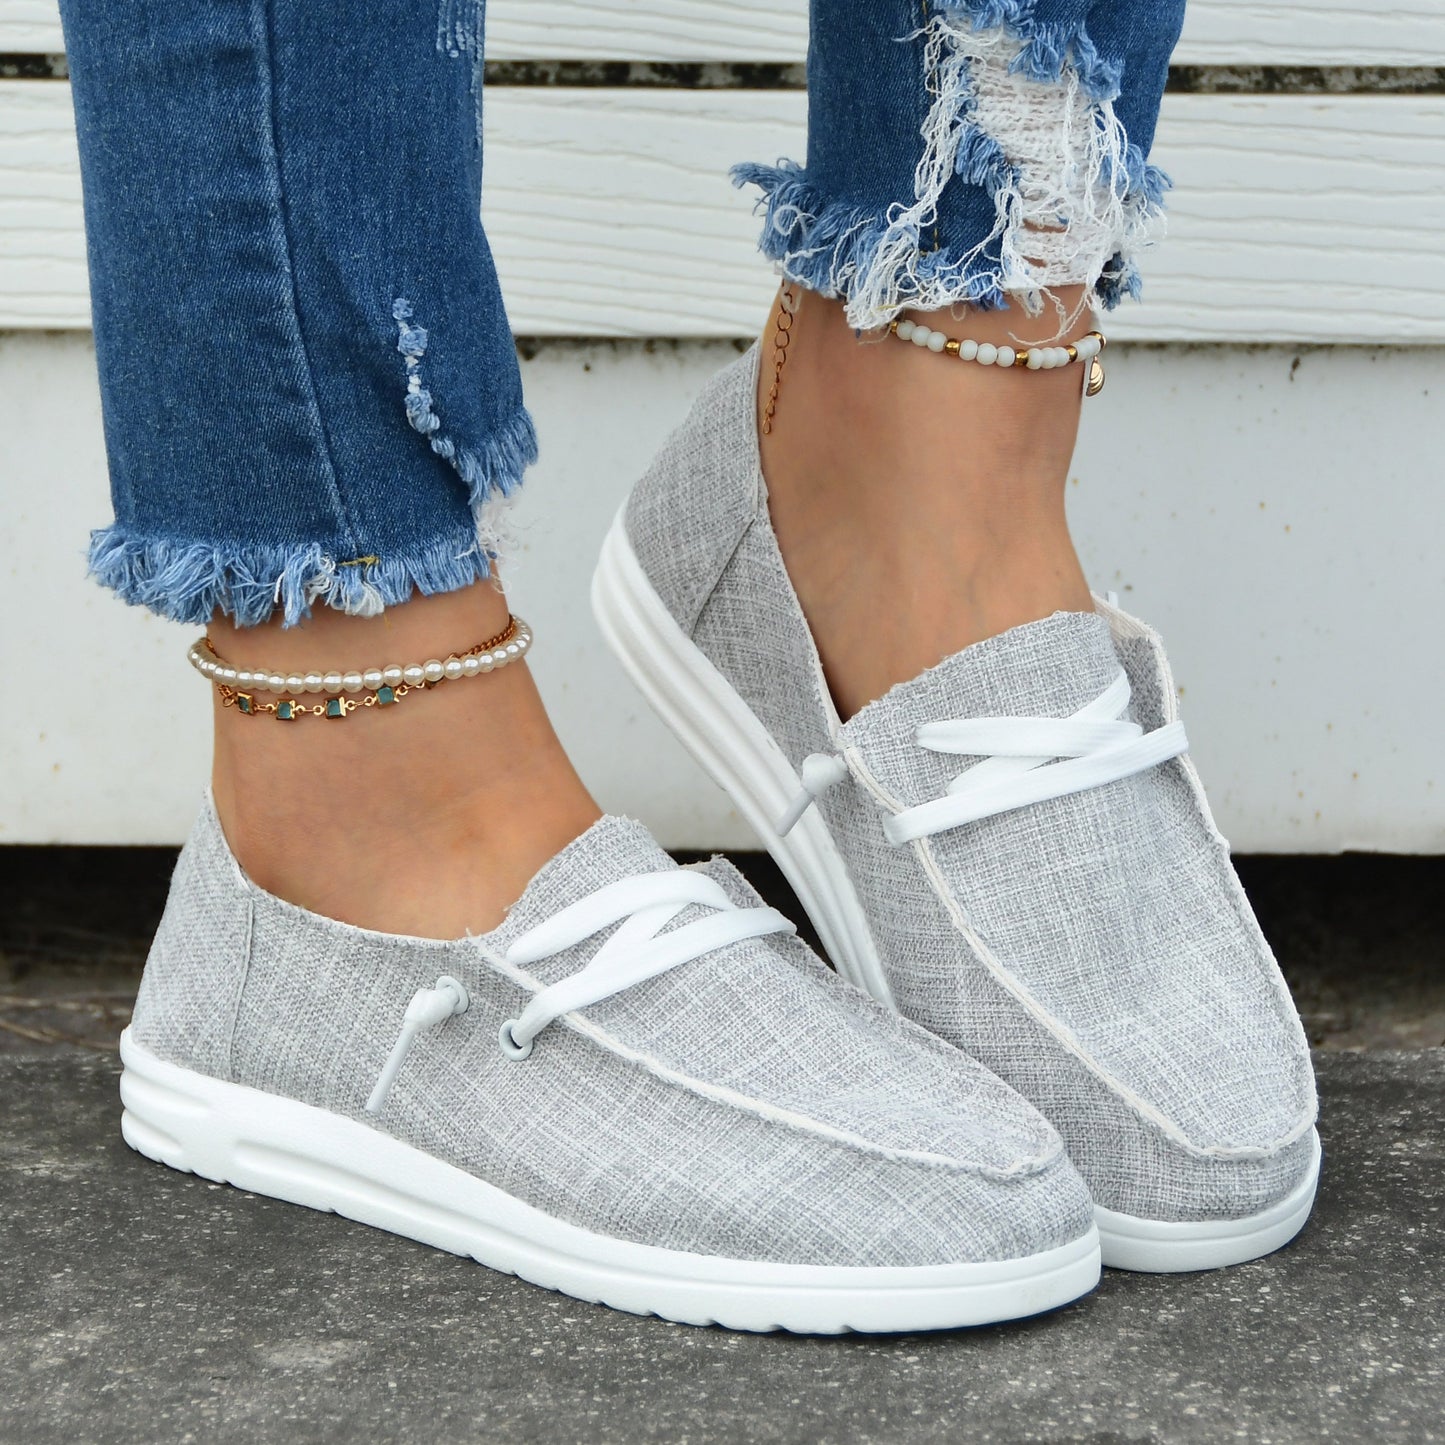 Casual Flat Canvas Shoes, Lace Up Low Top Walking Flats